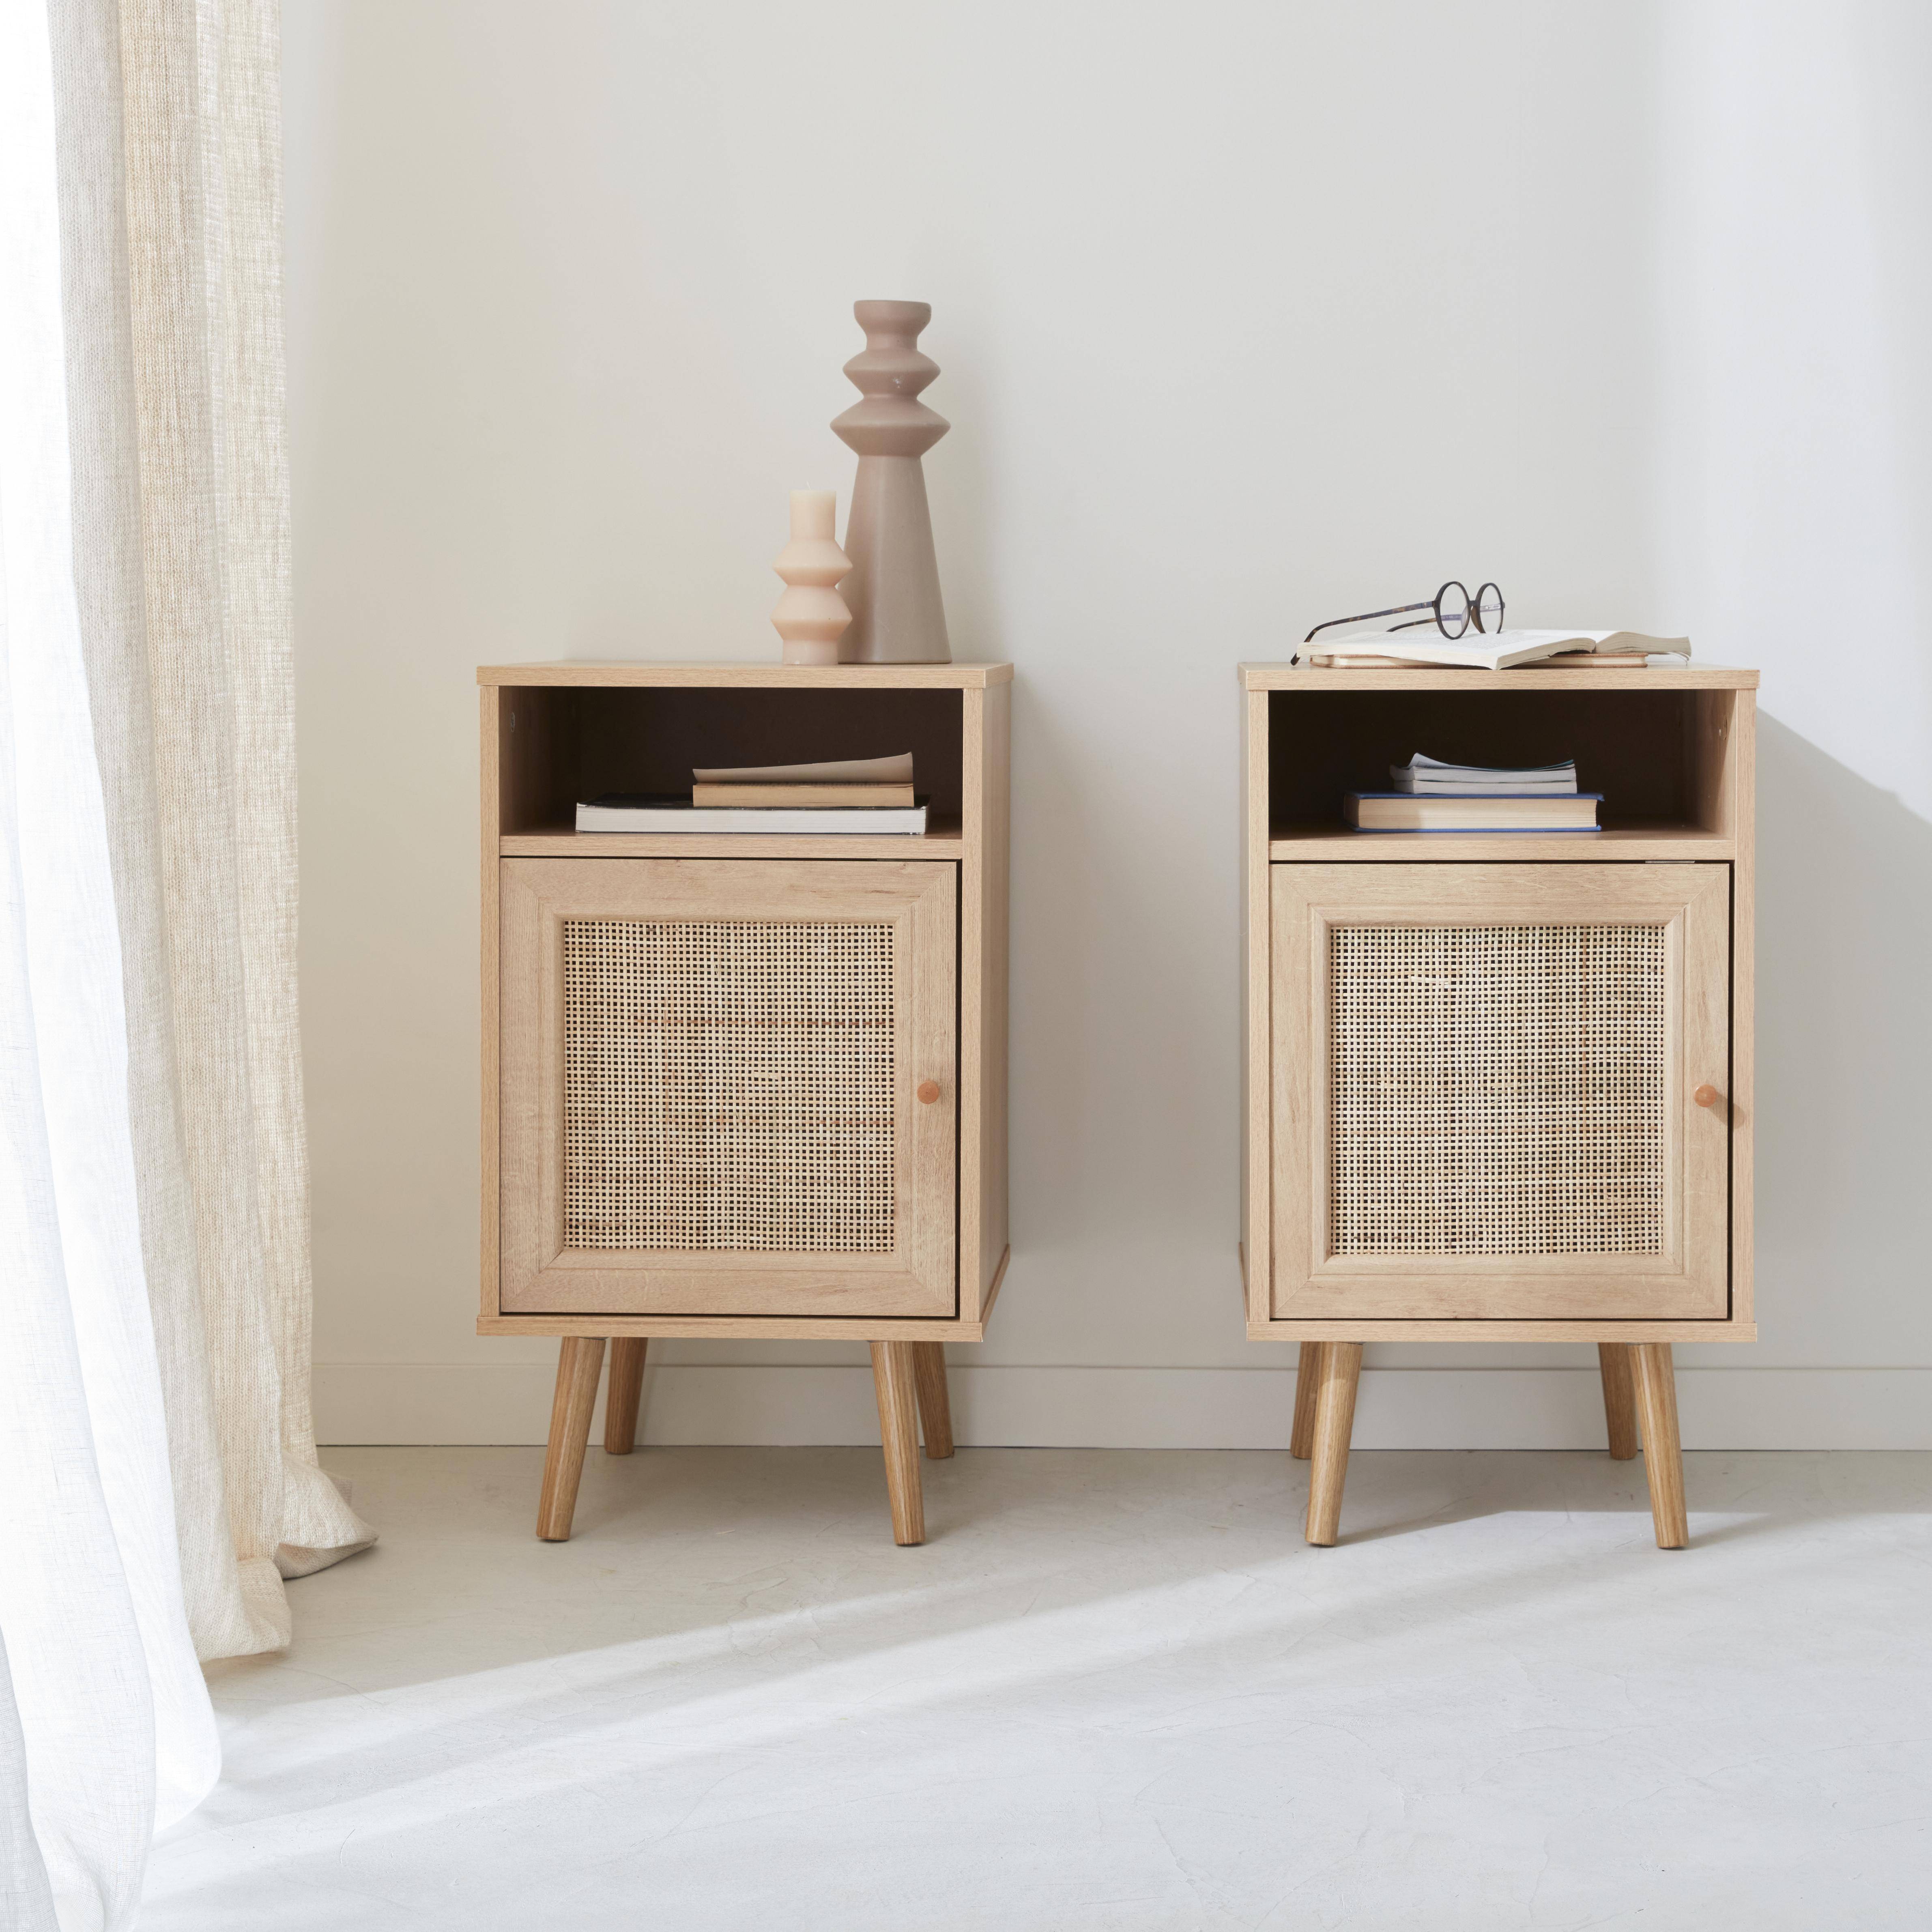 Pair of Scandi-style wood and cane rattan bedside tables with cupboard, 40x39x70cm - Boheme - Natural Wood colour Photo1